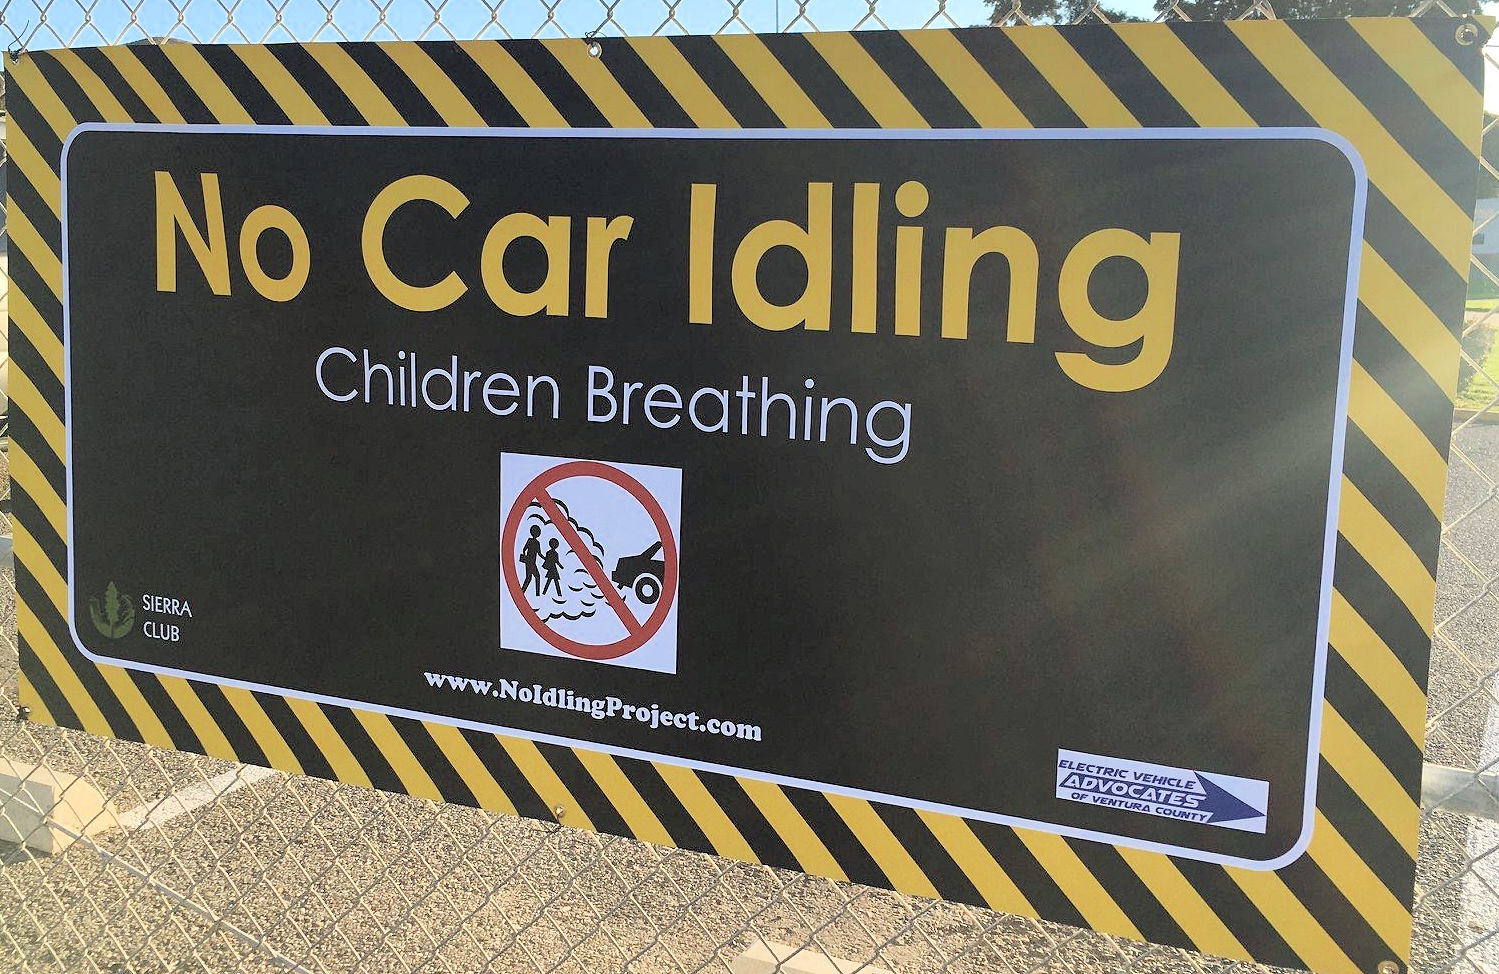 A sign in yellow and black reads "No Car Idling, Children breathing"